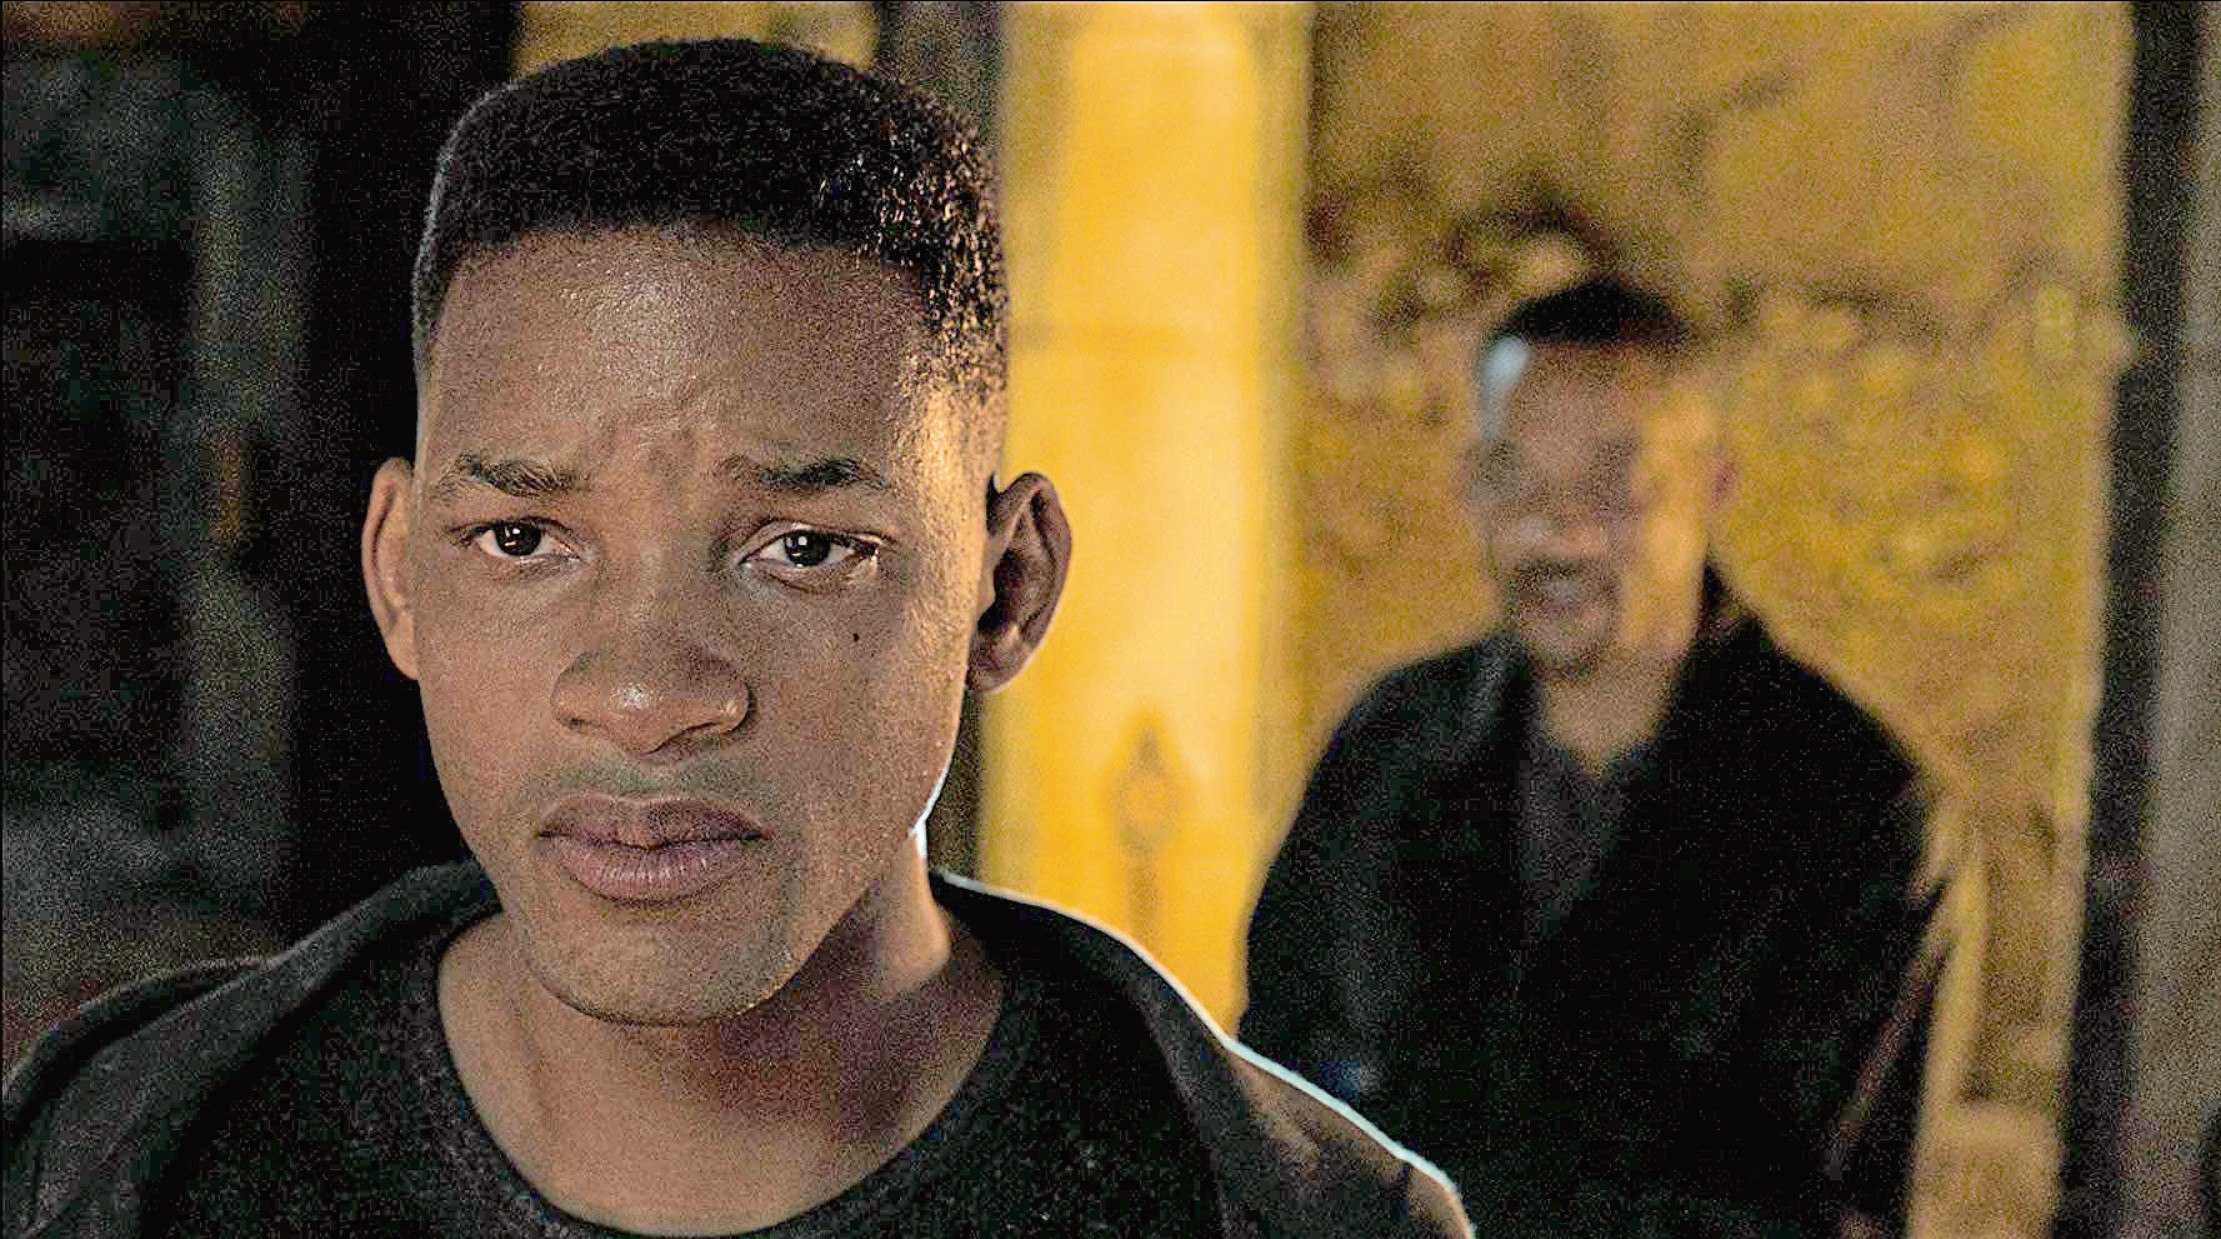 Will Smith plays both lead roles